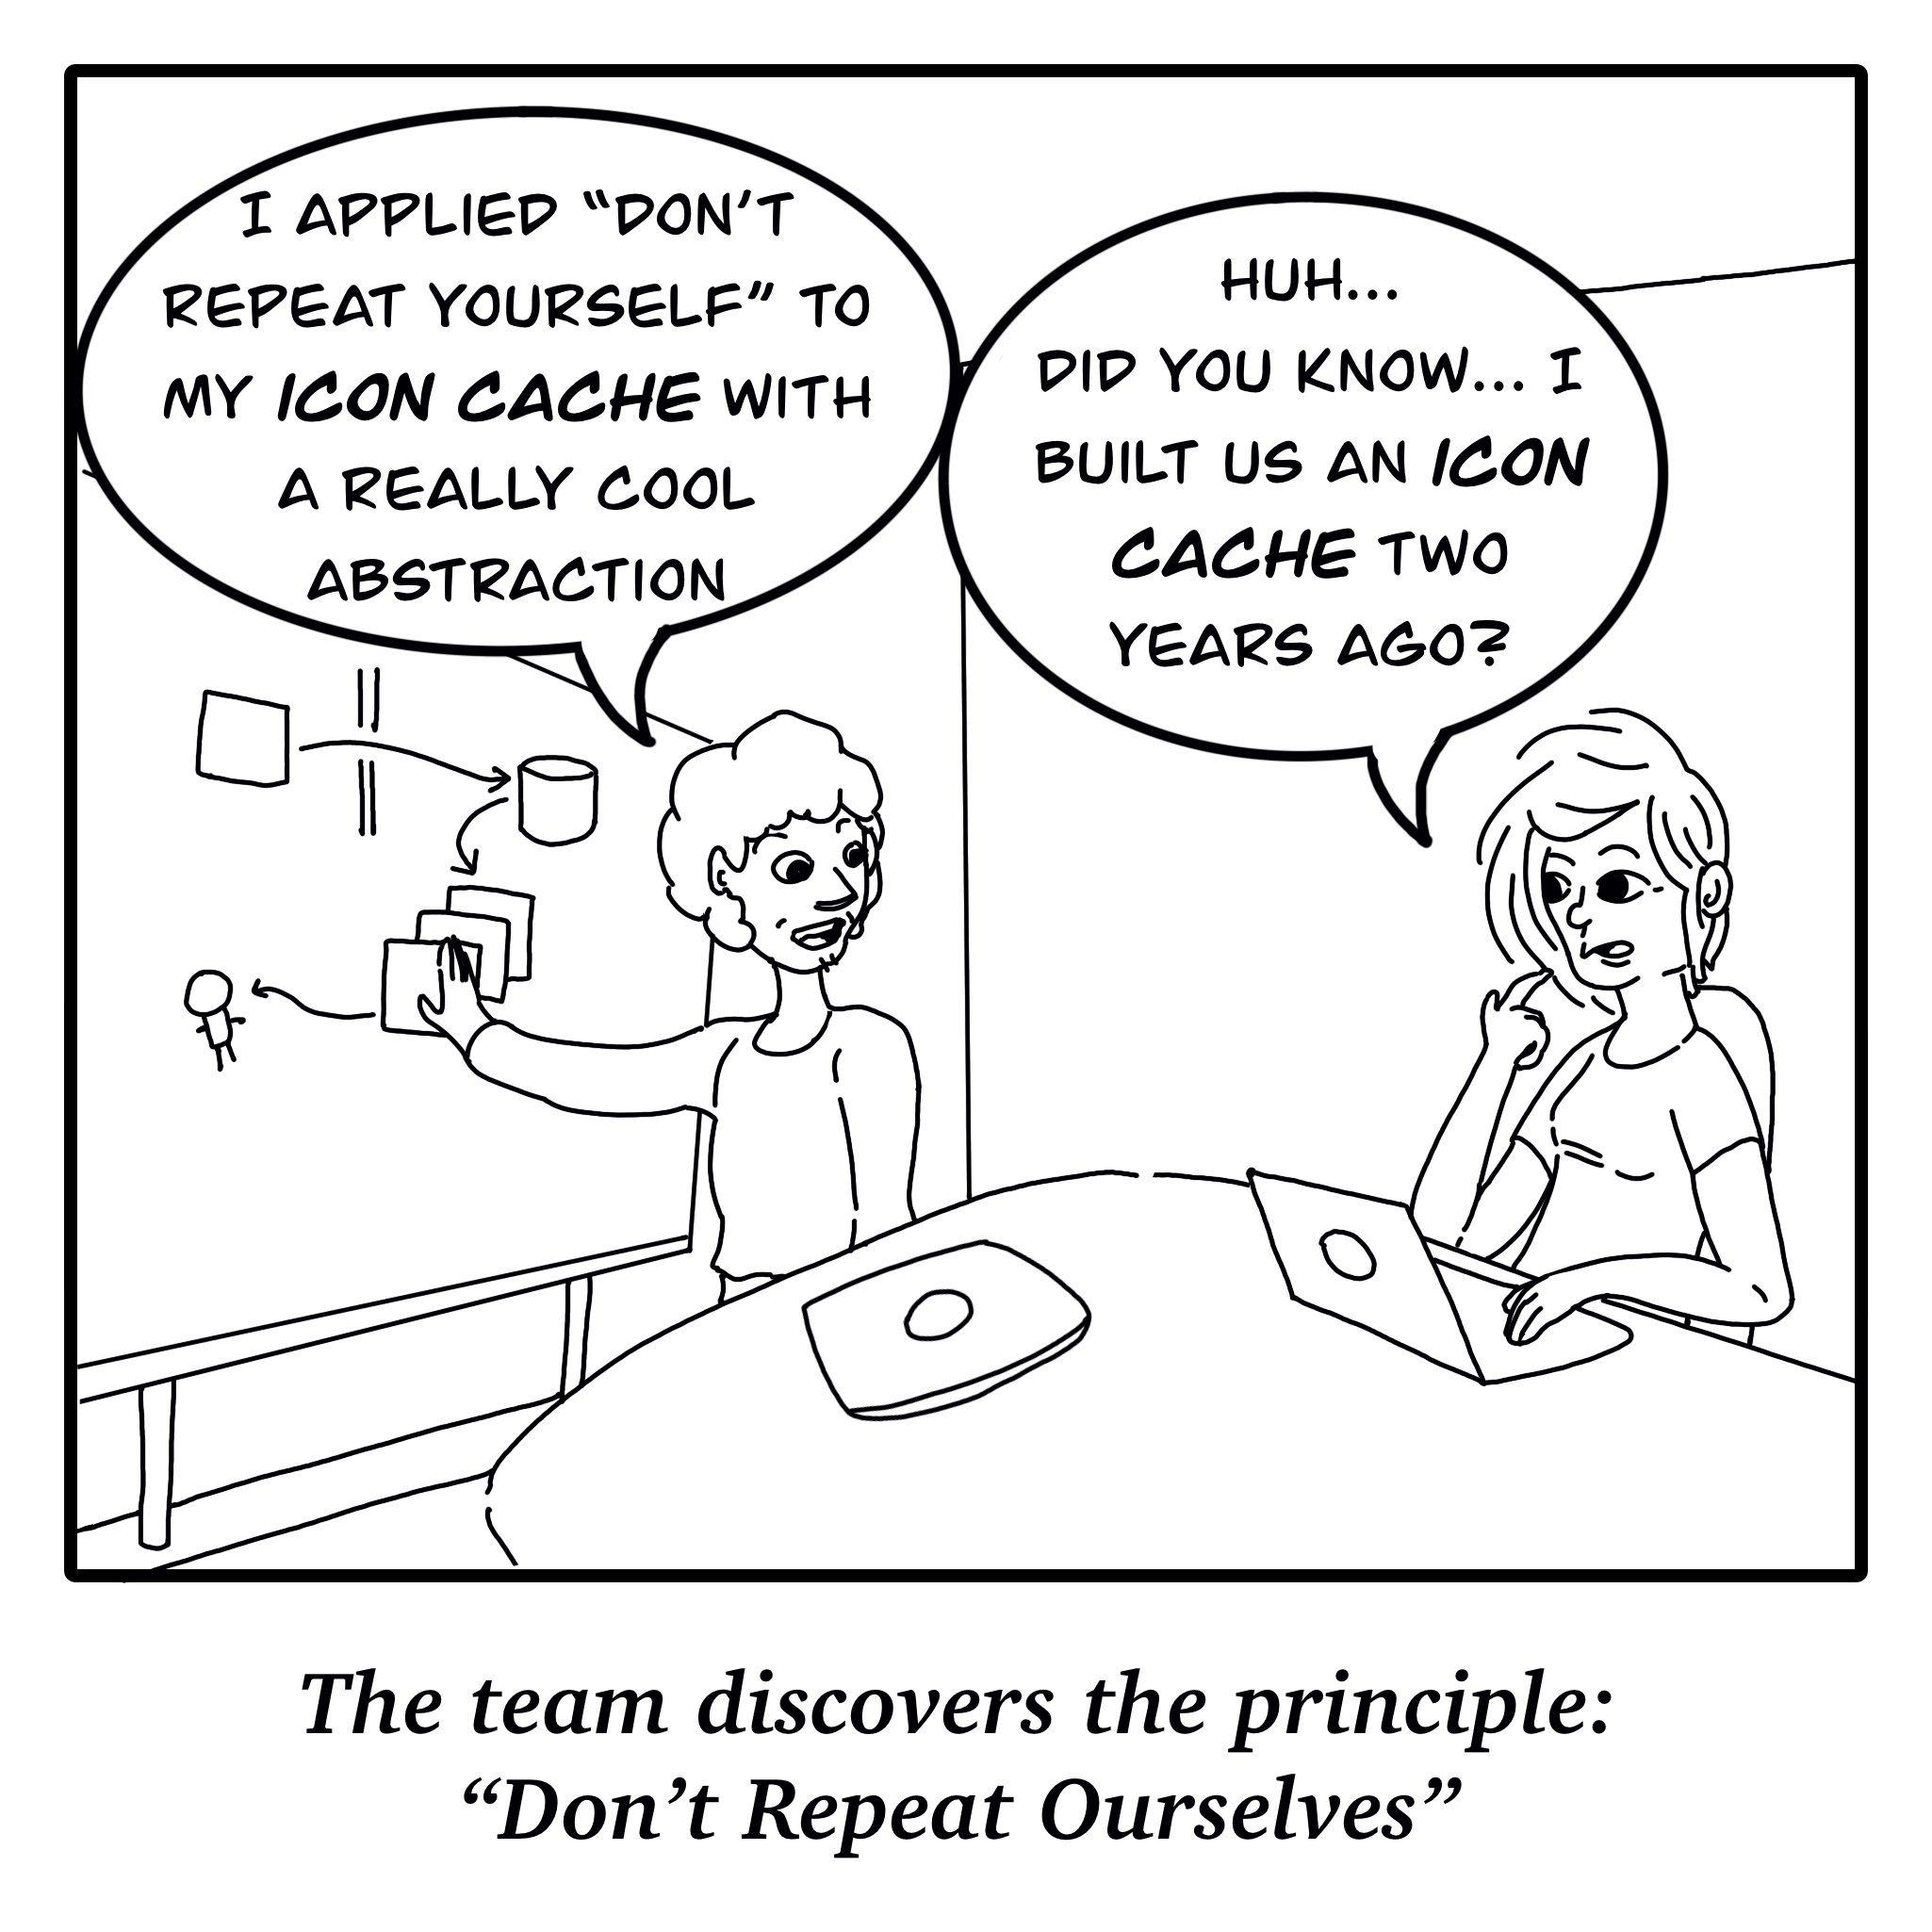 Comic:
        Character 1: 'I applied dont repeat yourself to my icon cache with a really cool abstraction'

        Character 2: 'huh, did you know, I built us an icon cache two years ago?'
        
        Bottom: The team discovers the principle 'don't repeat ourselves'